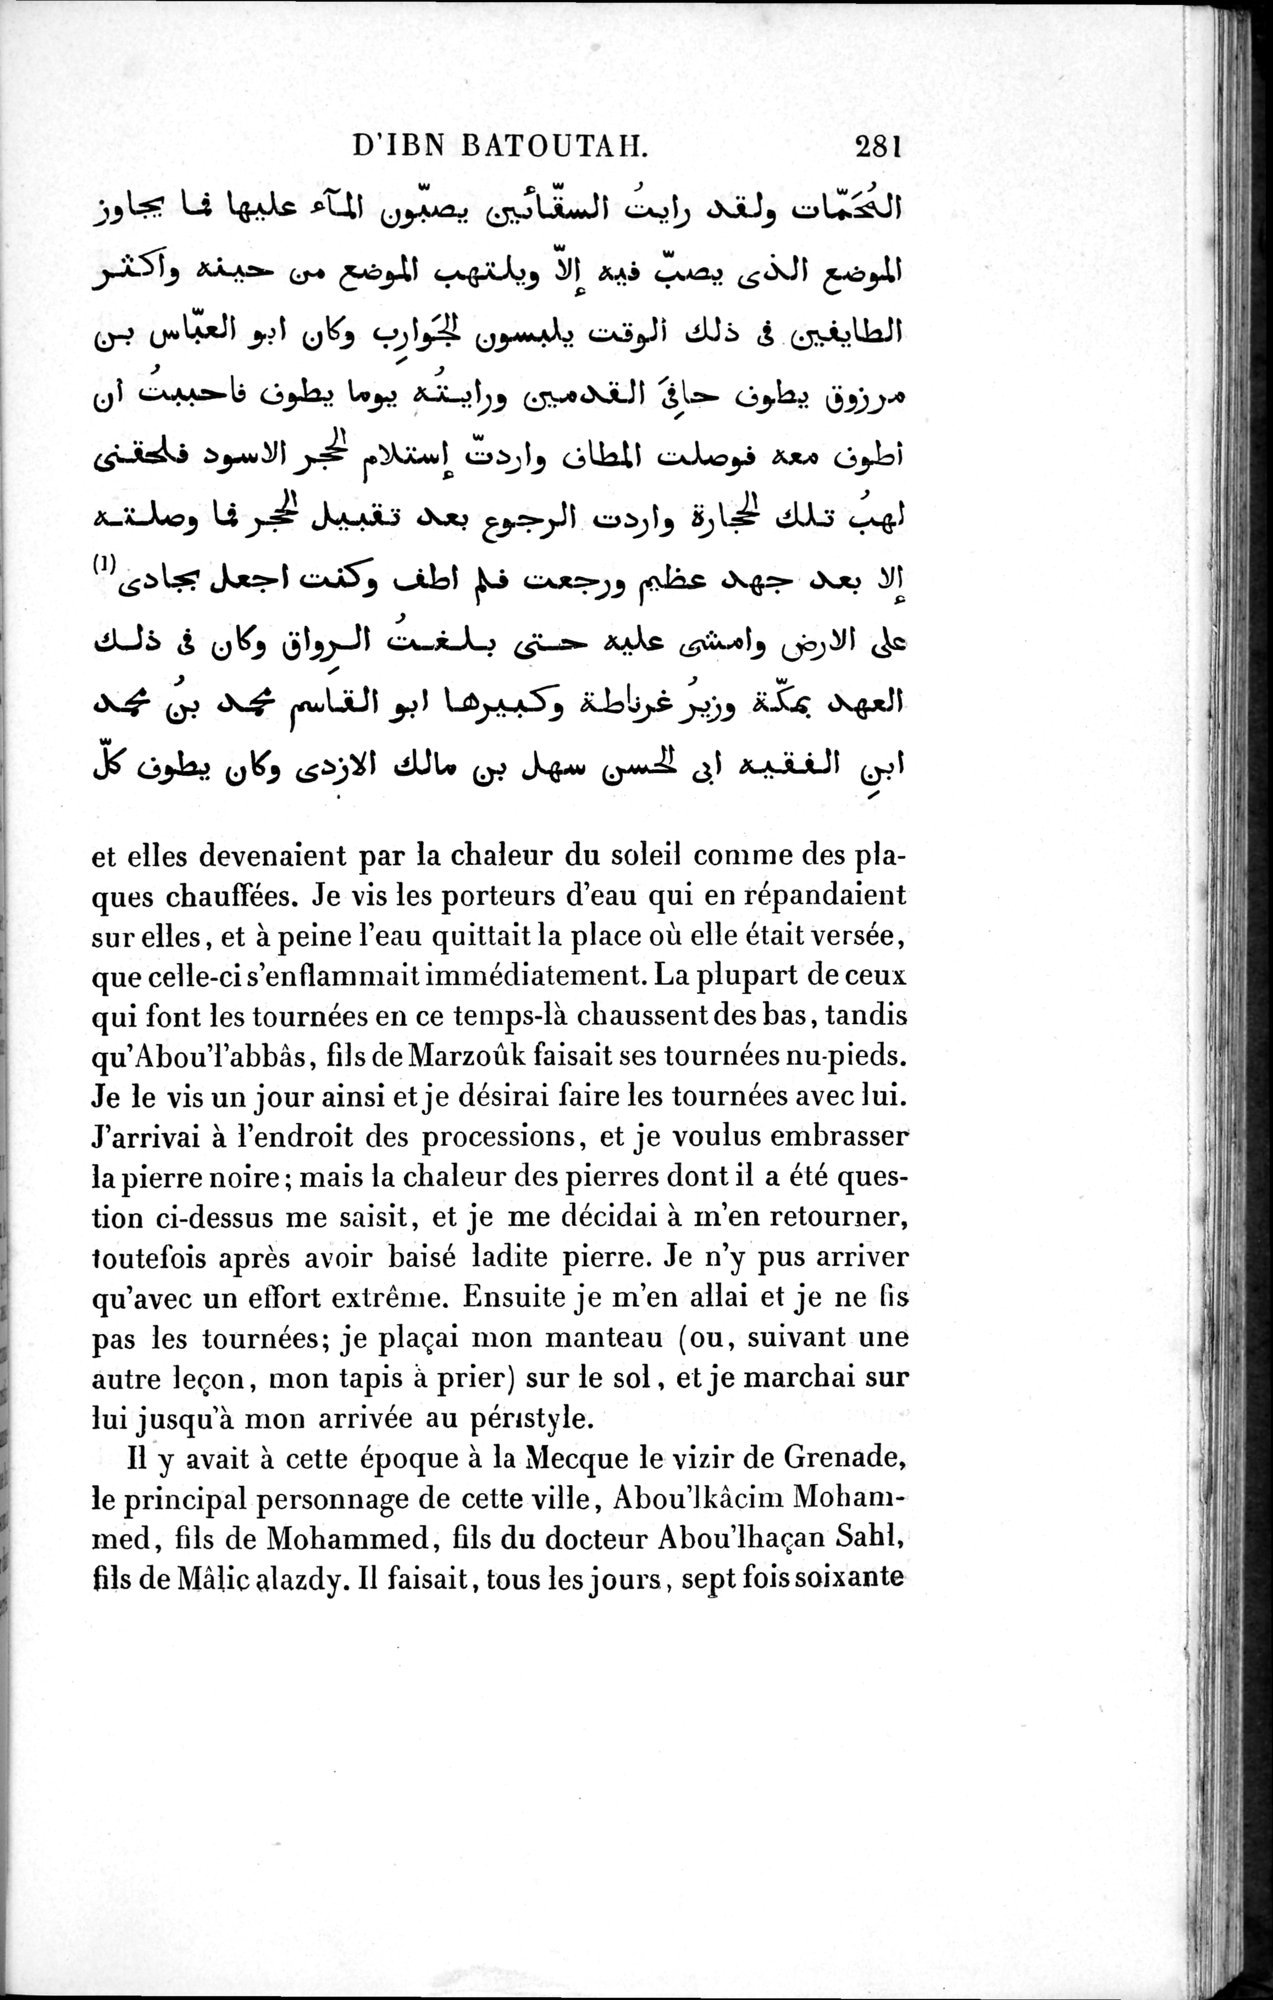 Voyages d'Ibn Batoutah : vol.1 / Page 341 (Grayscale High Resolution Image)